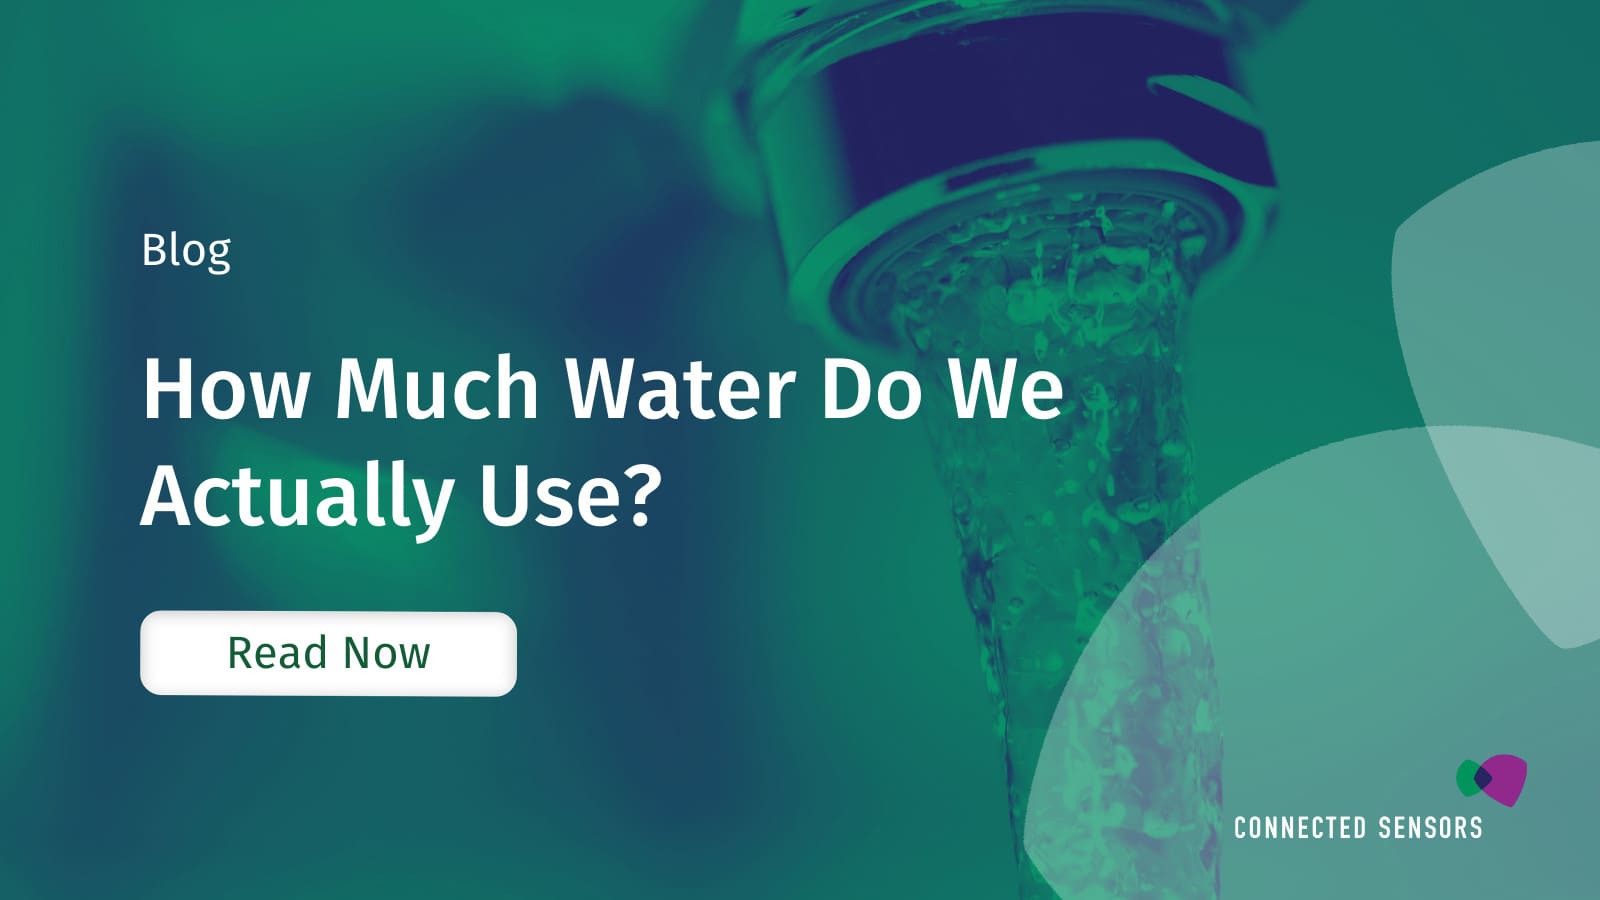 How Much Water Do We Actually Use?